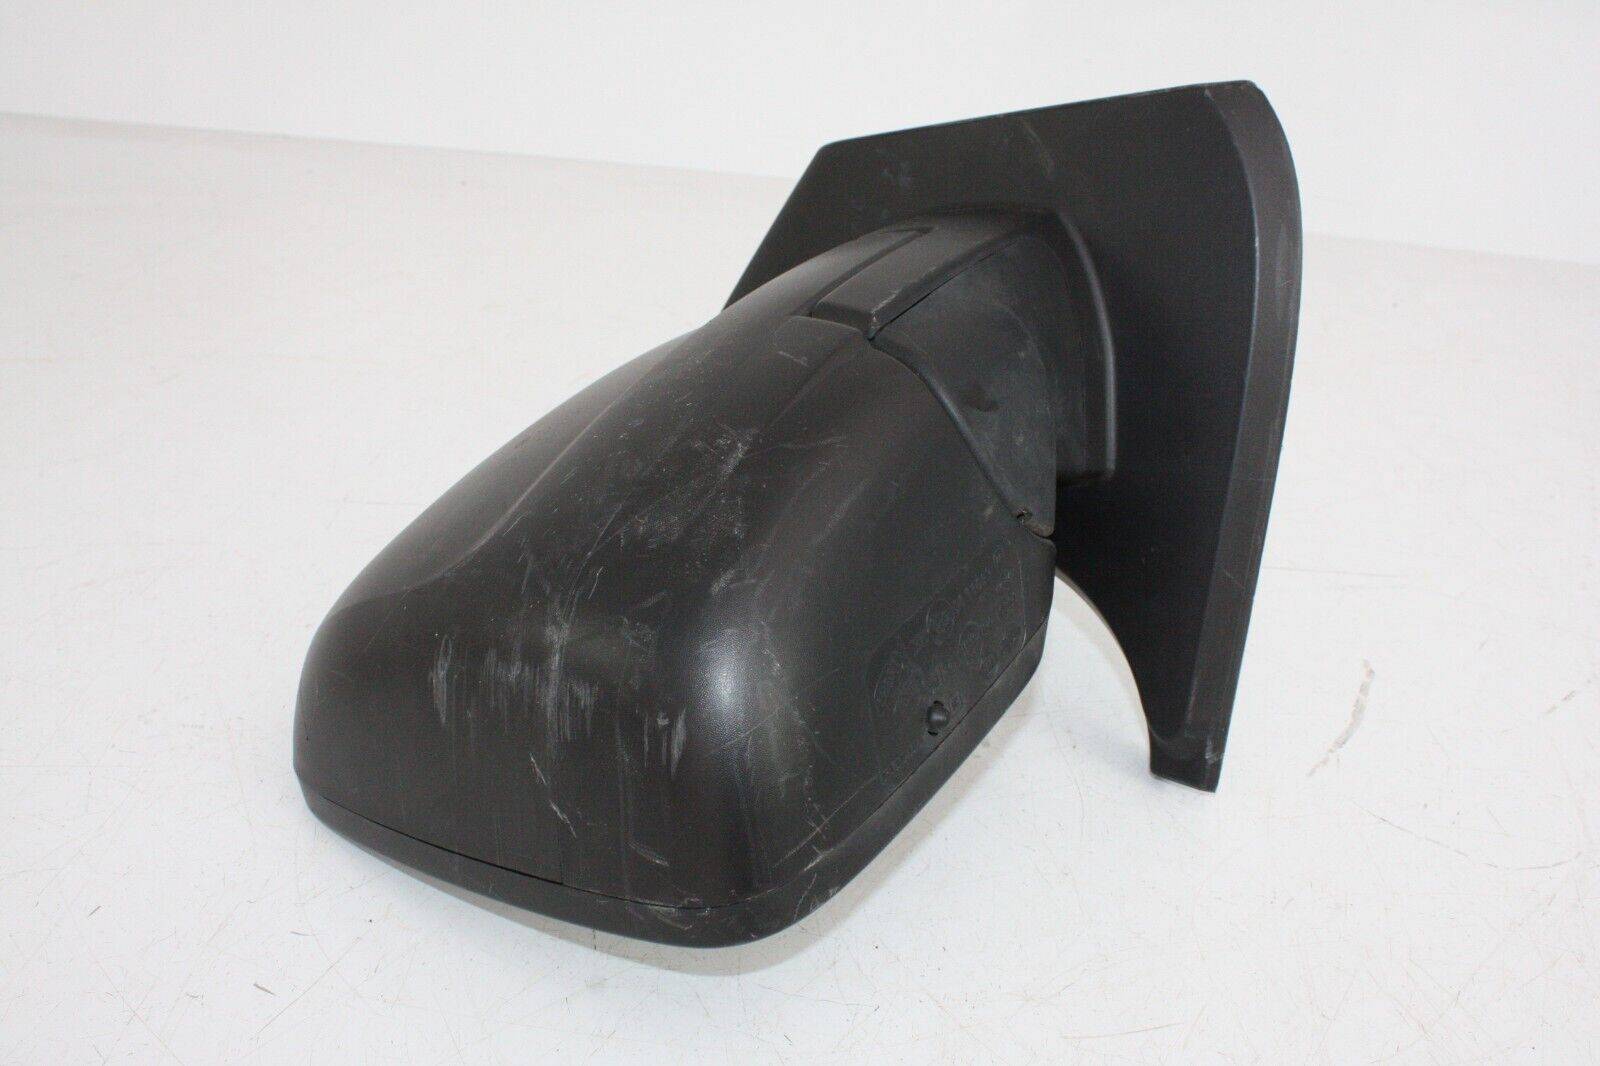 RENAULT-TRAFIC-RIGHT-SIDE-WING-MIRROR-2014-ON-175422229386-6